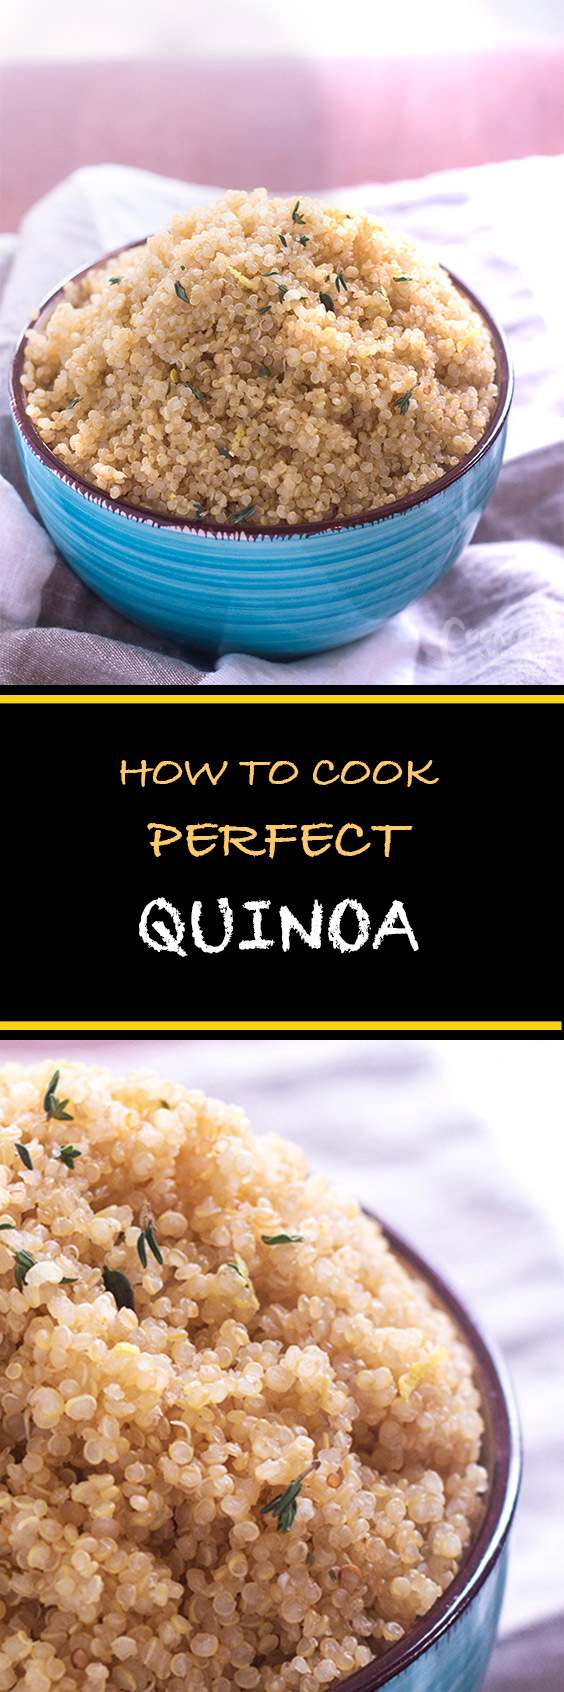 How to cook perfect quinoa - Cooking Maniac